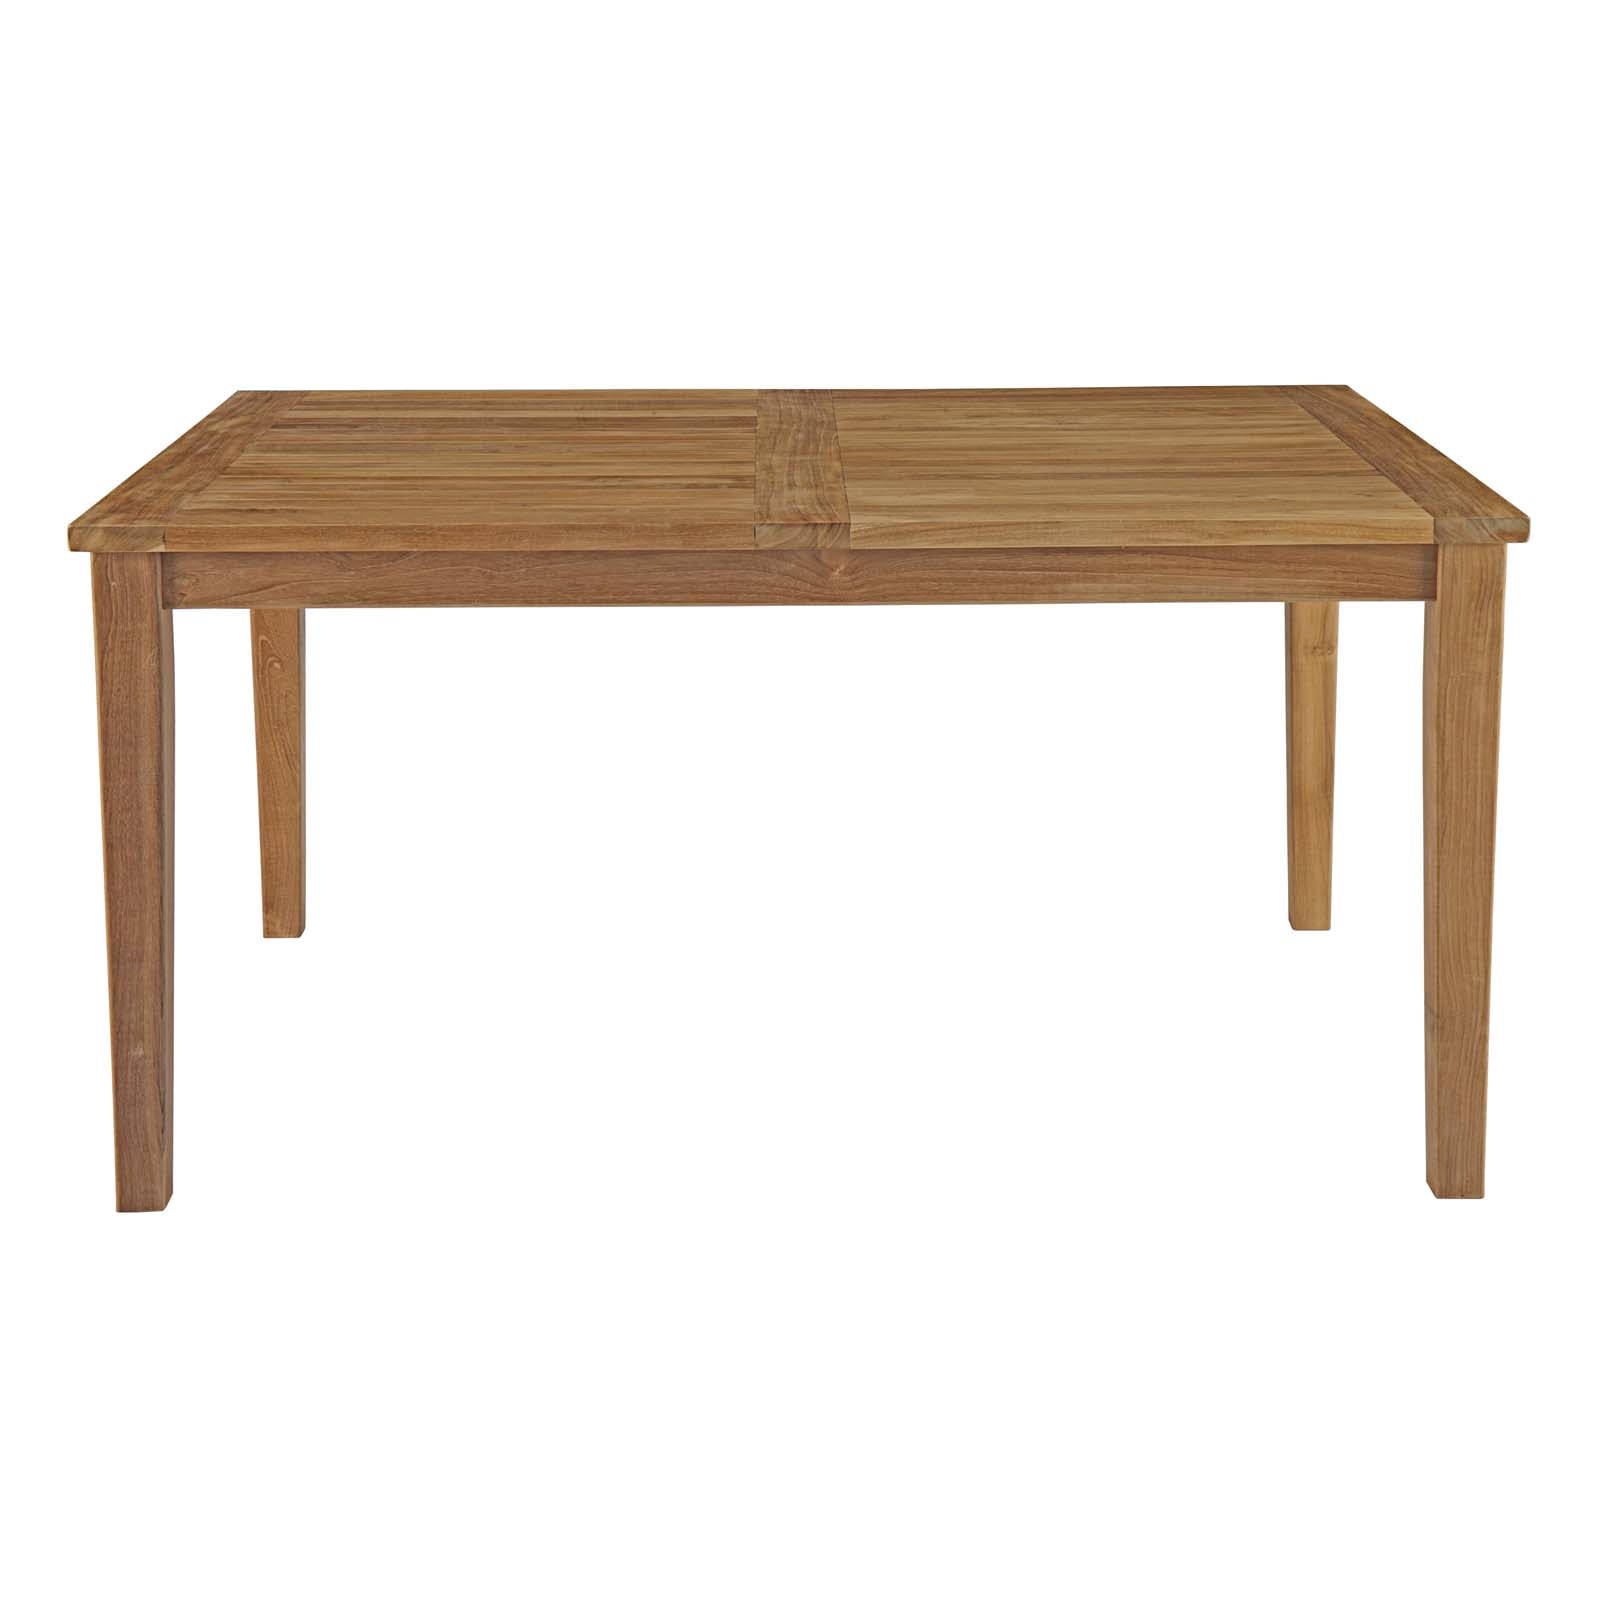 Marina Outdoor Patio Teak Dining Table-Outdoor Dining Table-Modway-Wall2Wall Furnishings